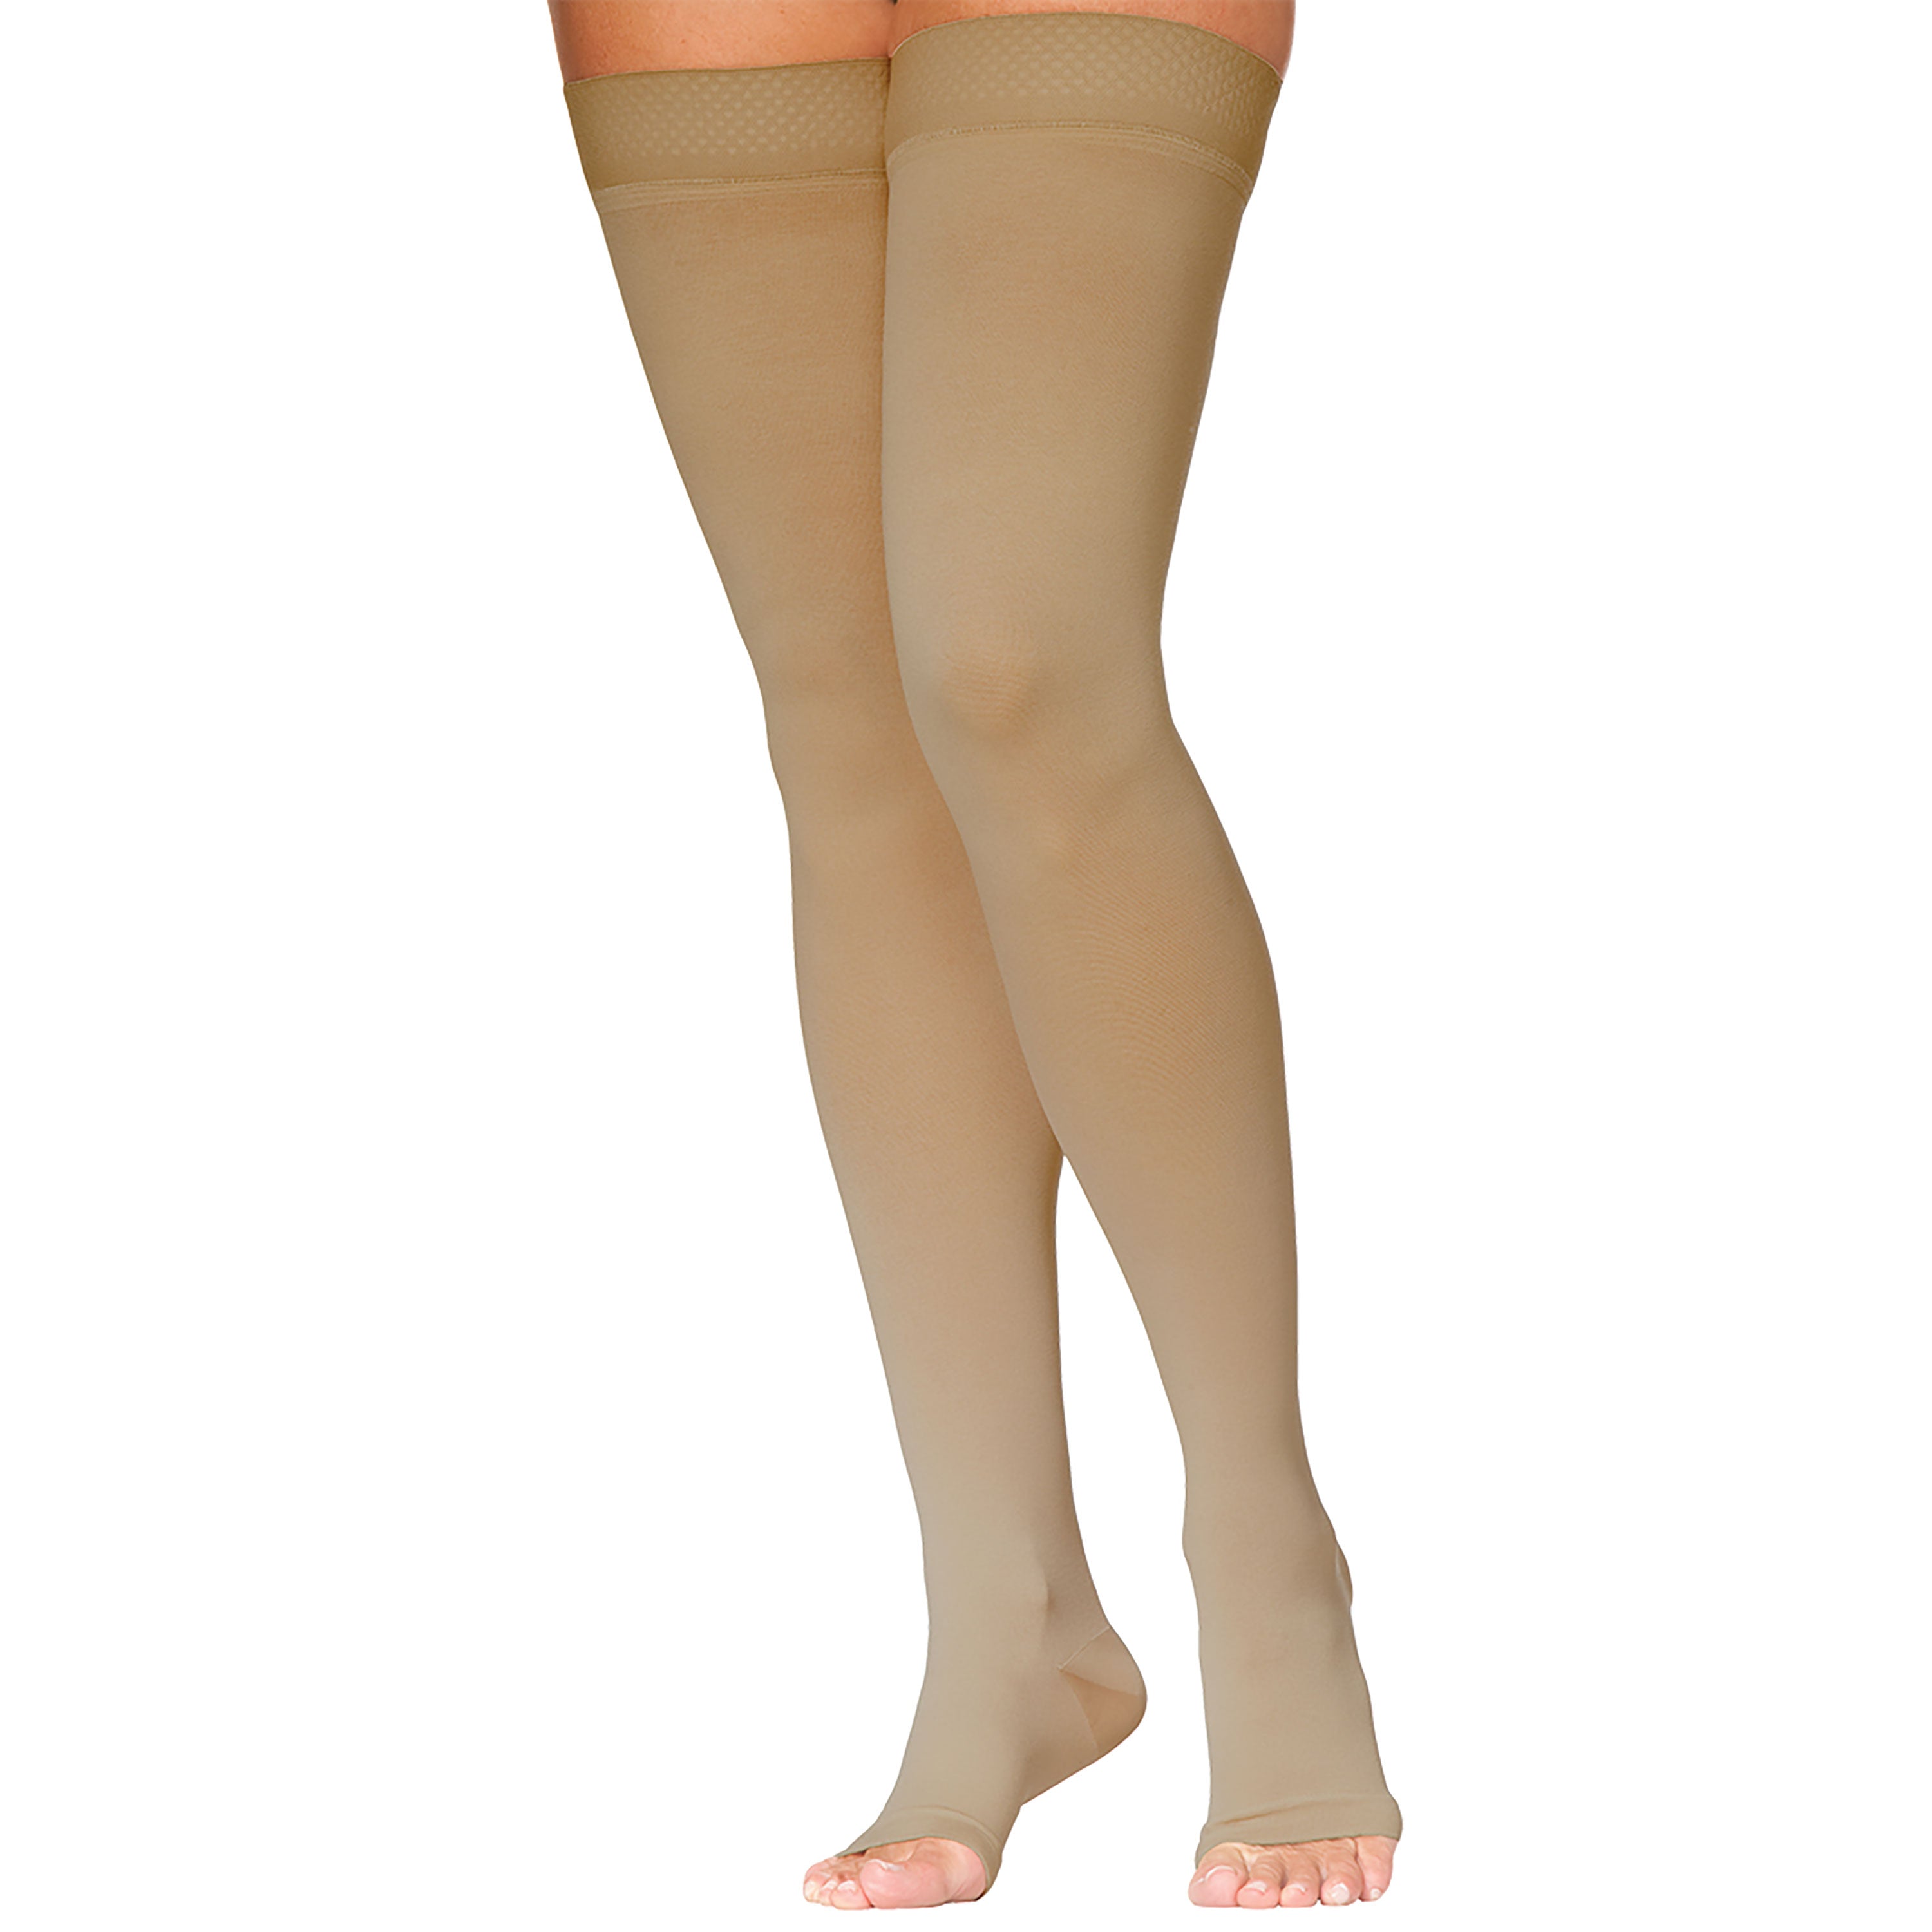 IT STAYS Adhesive Lotion  Compression Stockings, Sleeves